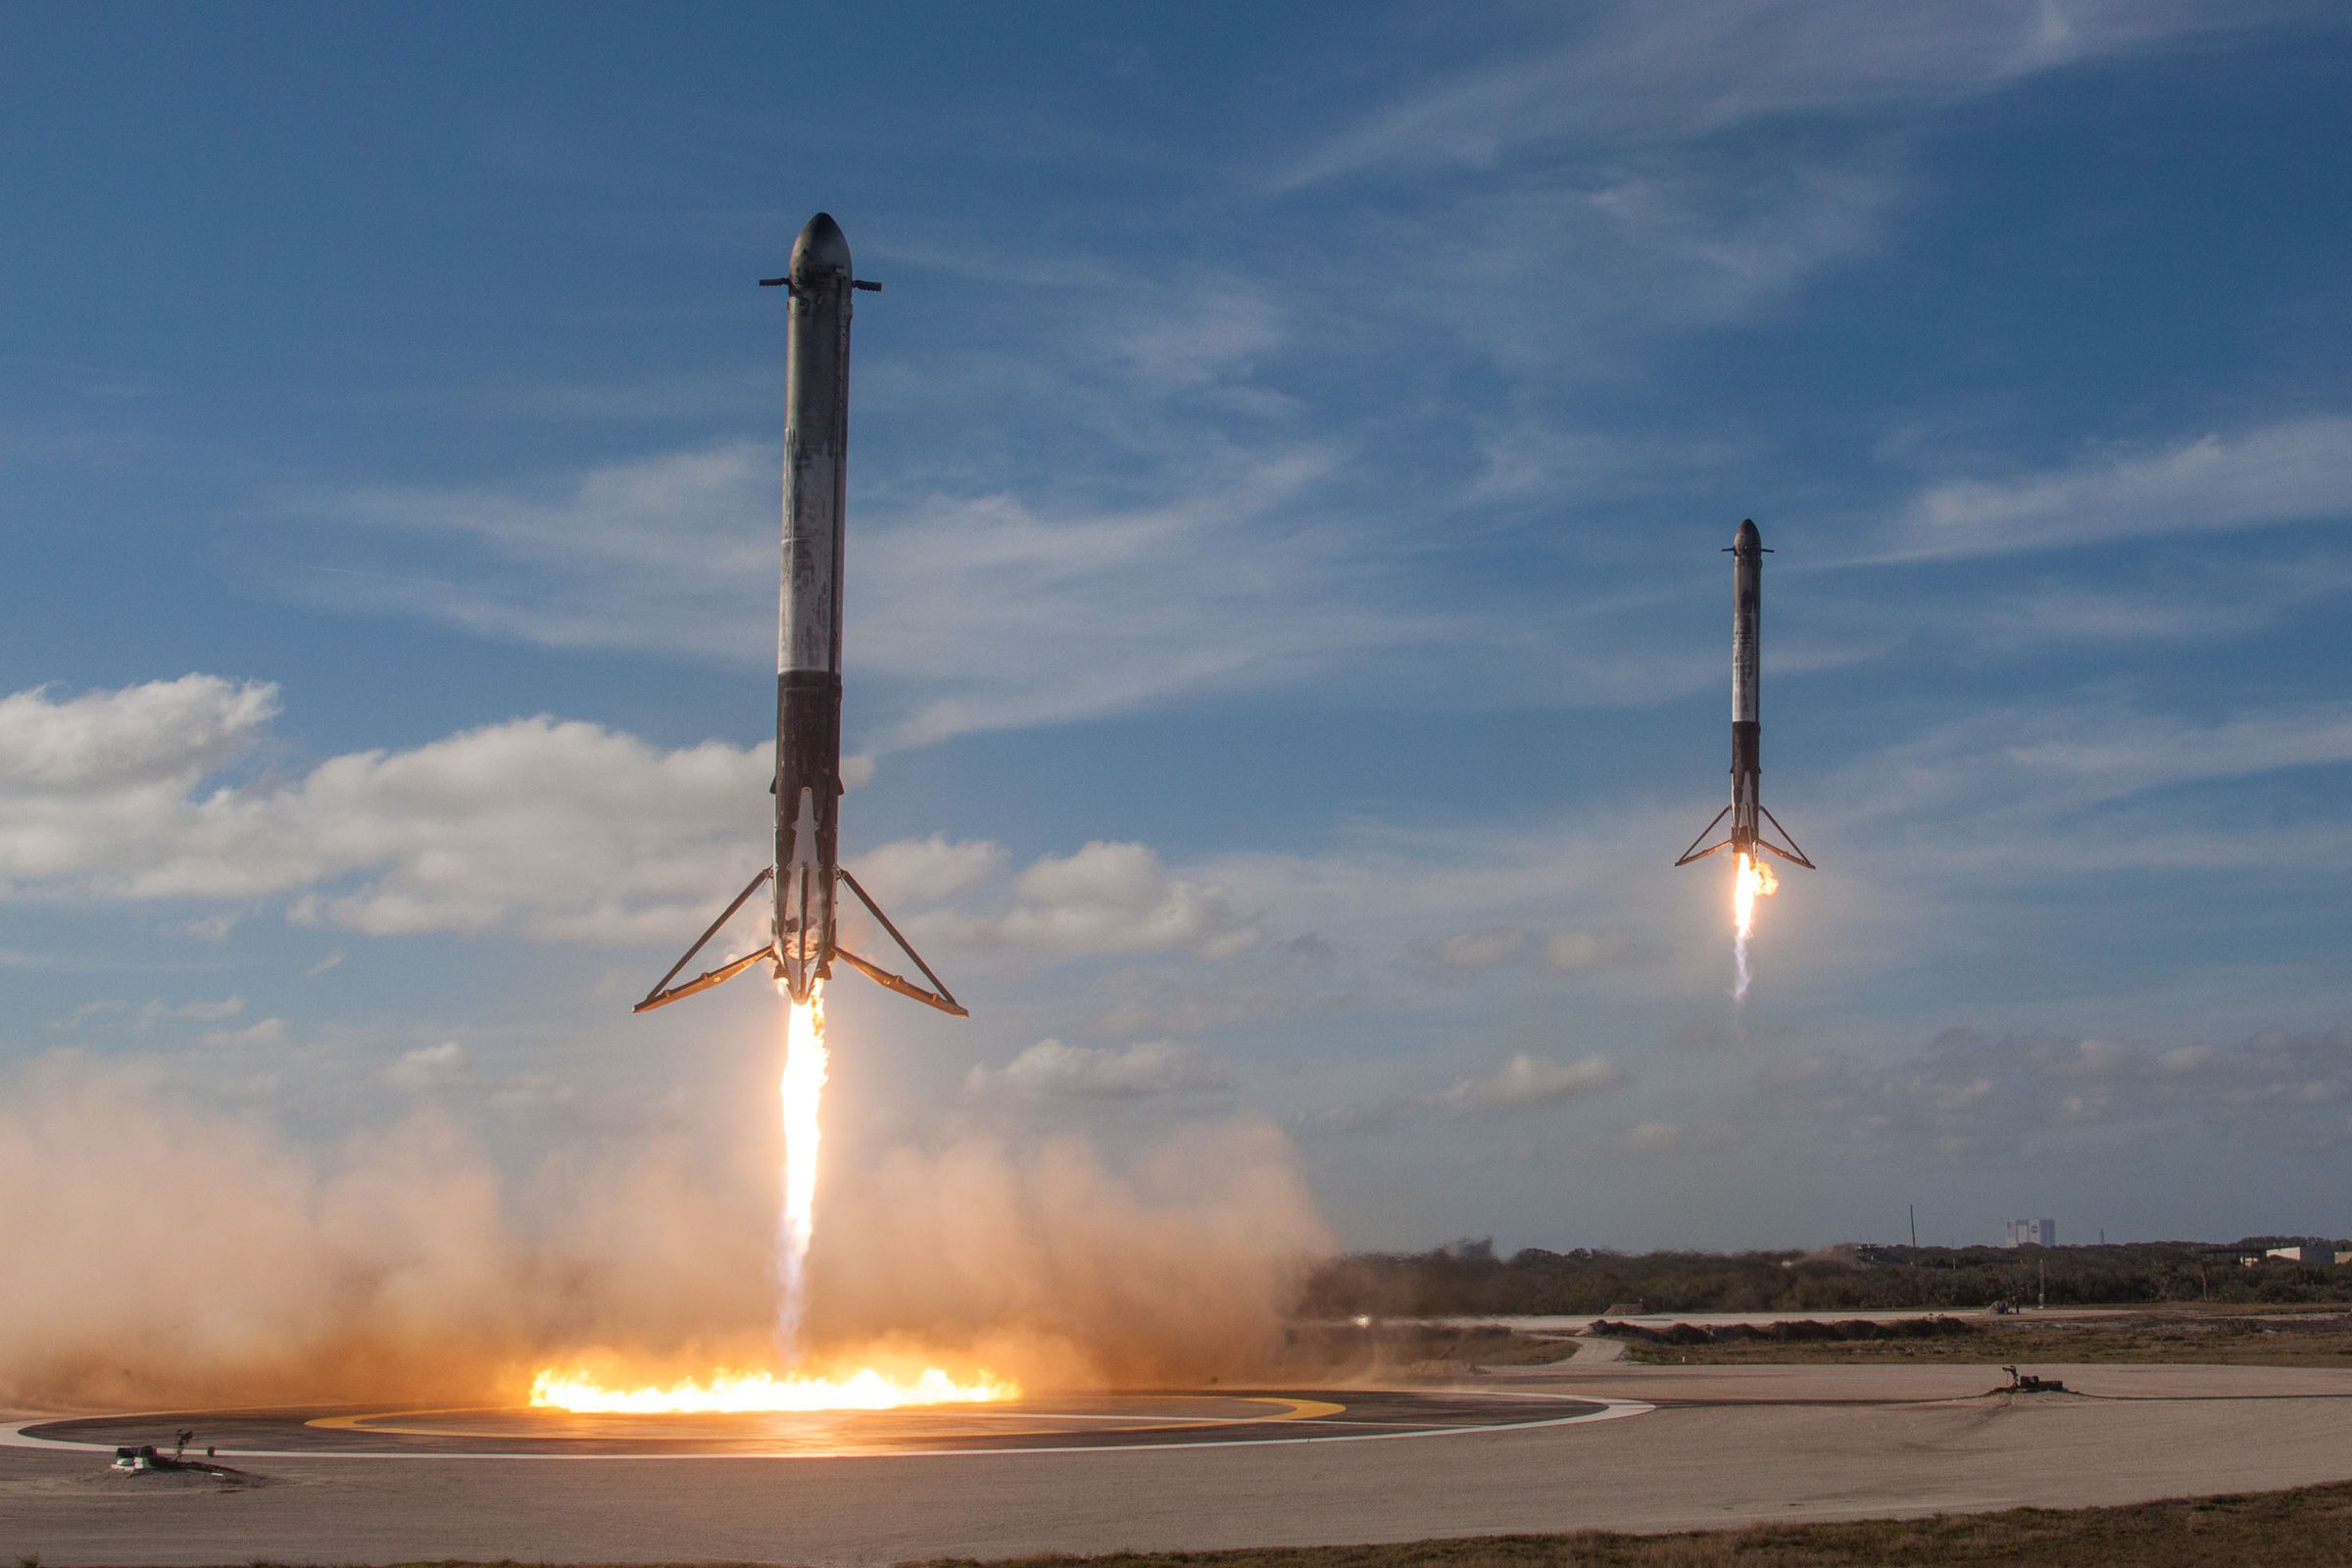 The first stage of SpaceX’s Falcon 9 lands using its engines